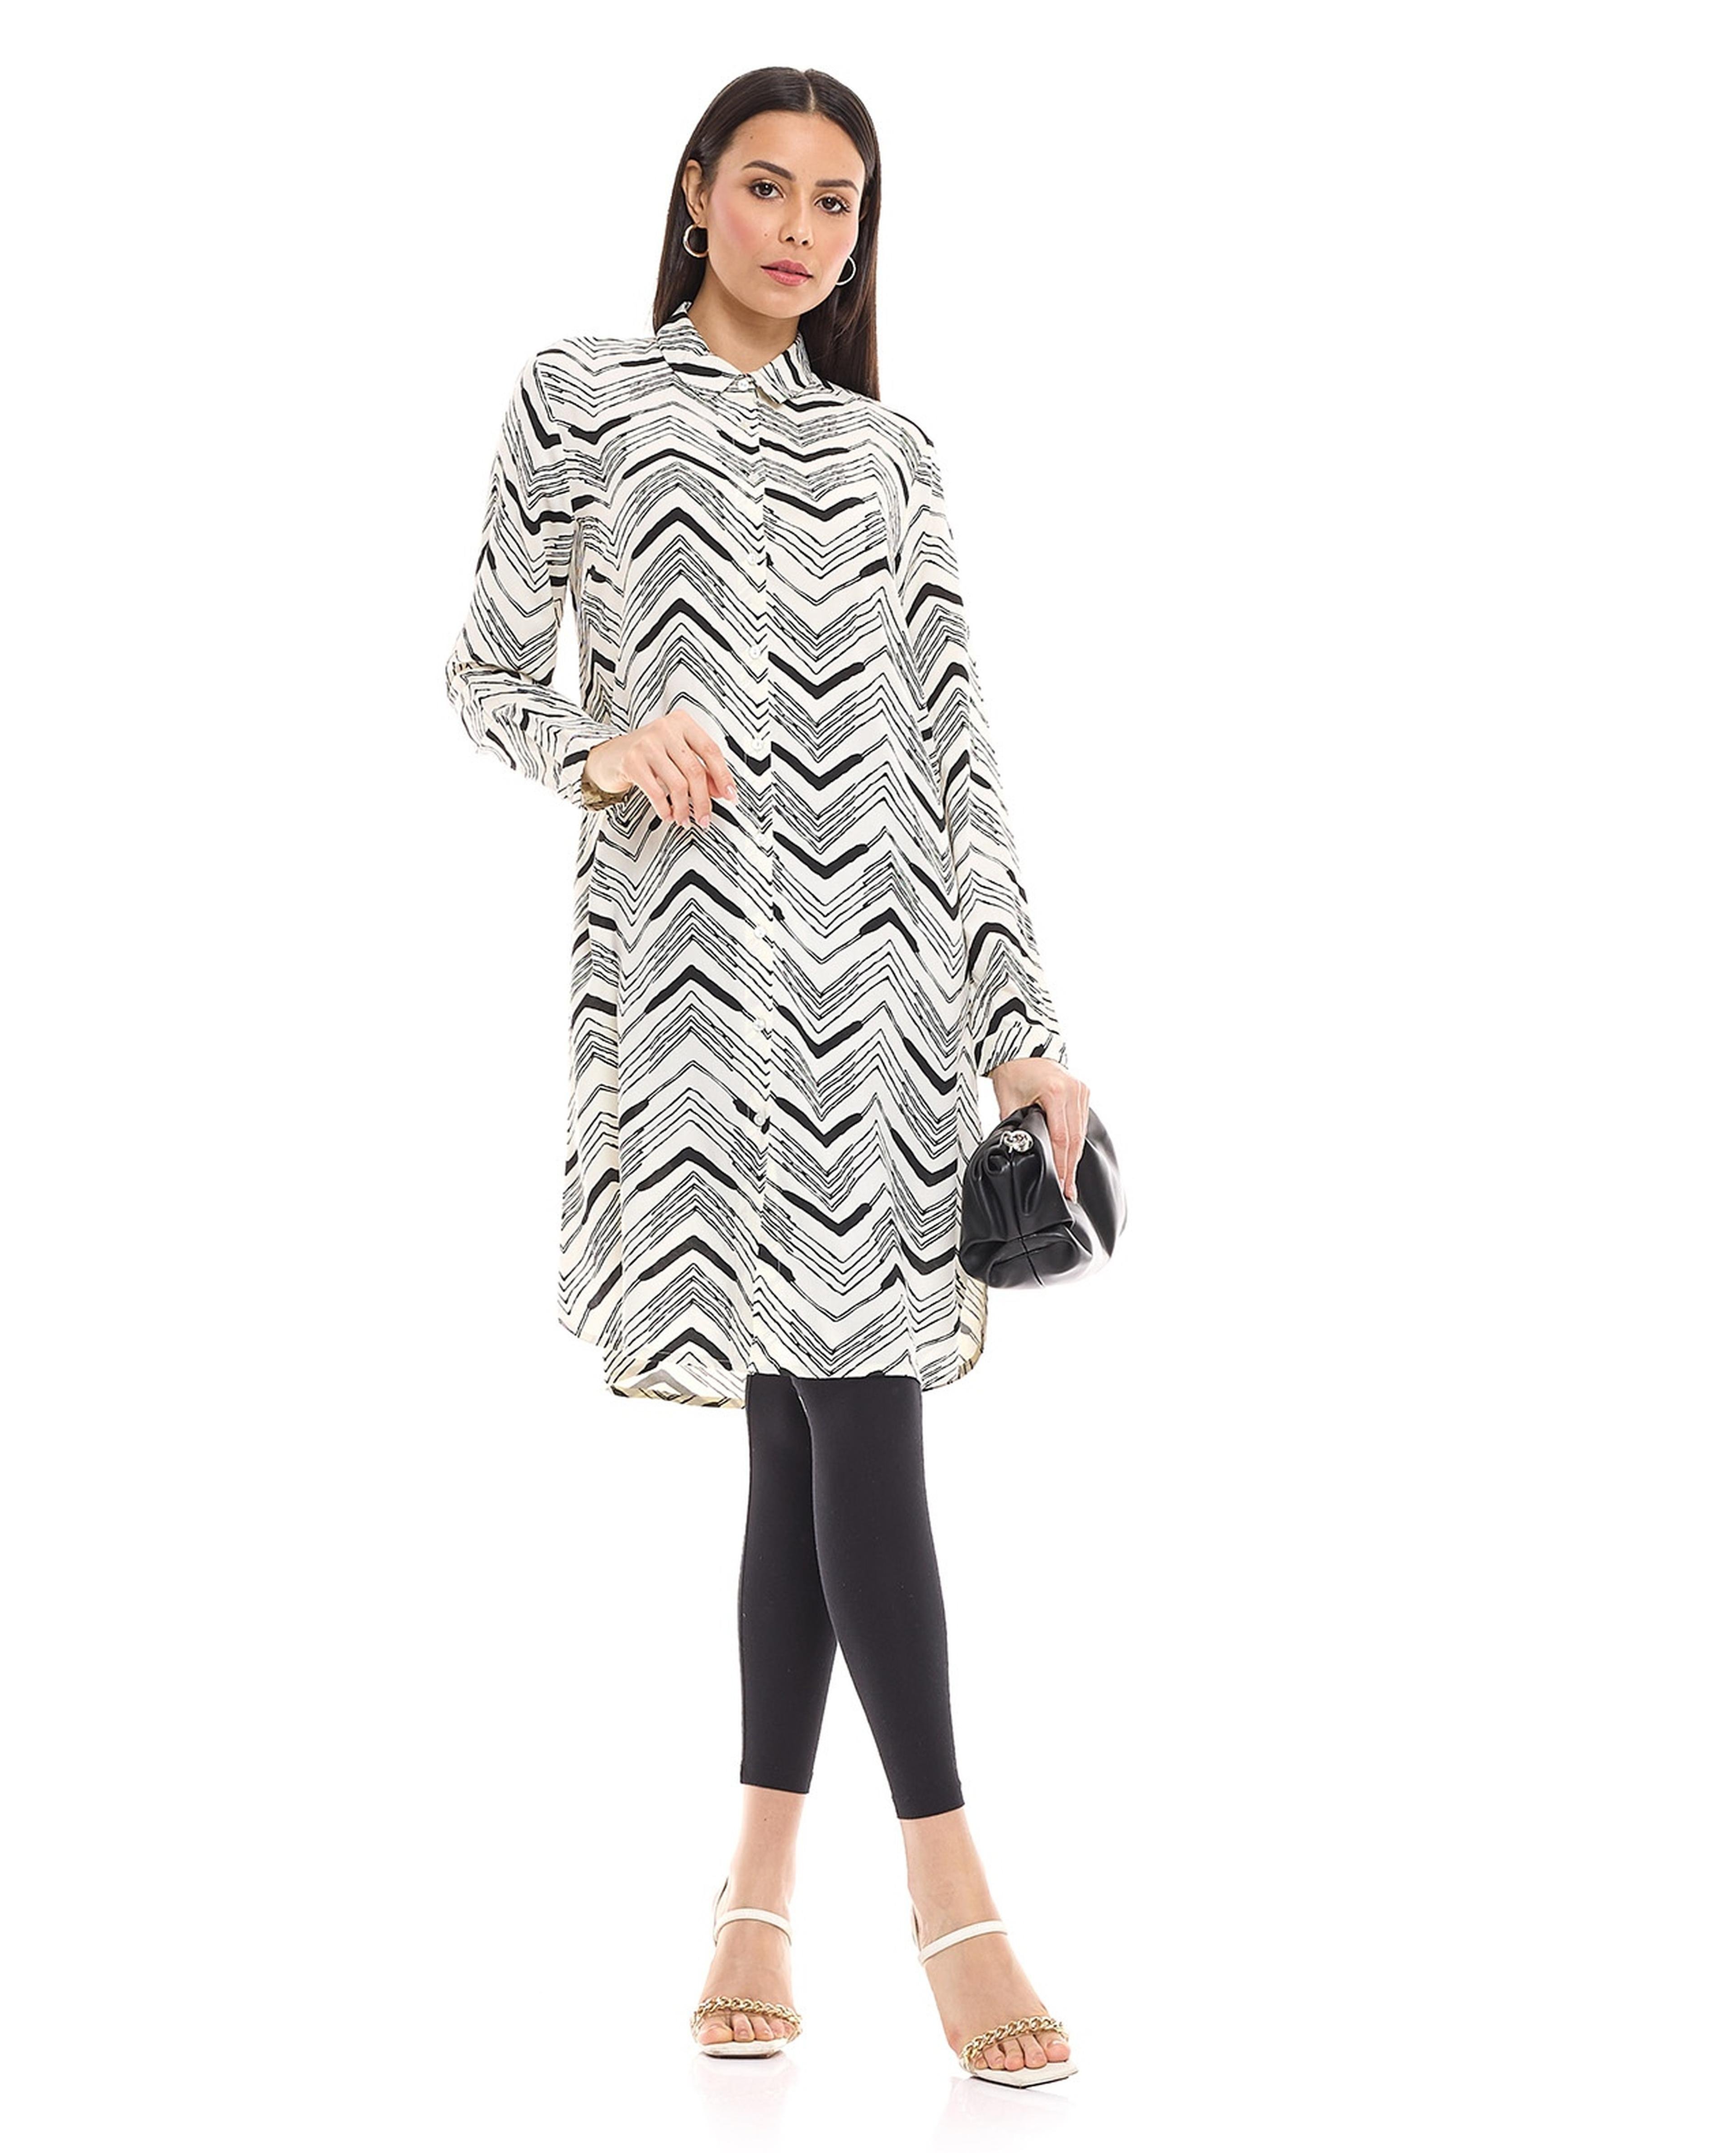 Chevron Patterned Tunic with Shirt Collar and Long Sleeves